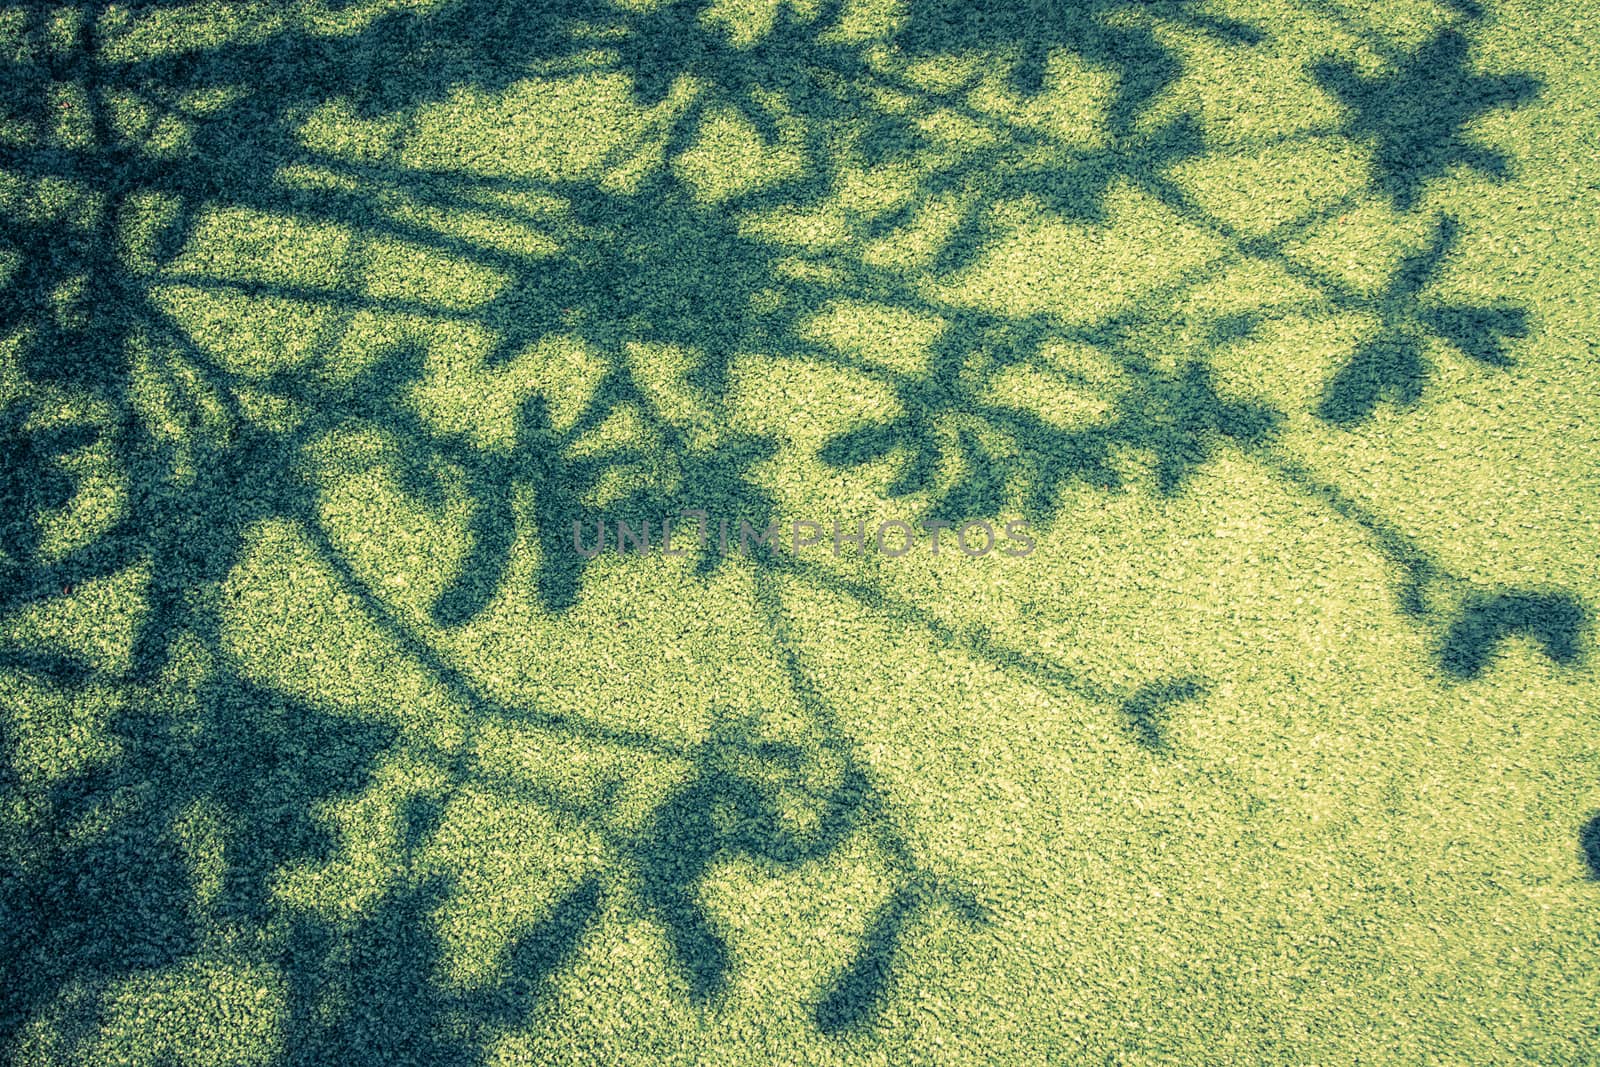 shadow of  tree on grass ground.Vintage filter.